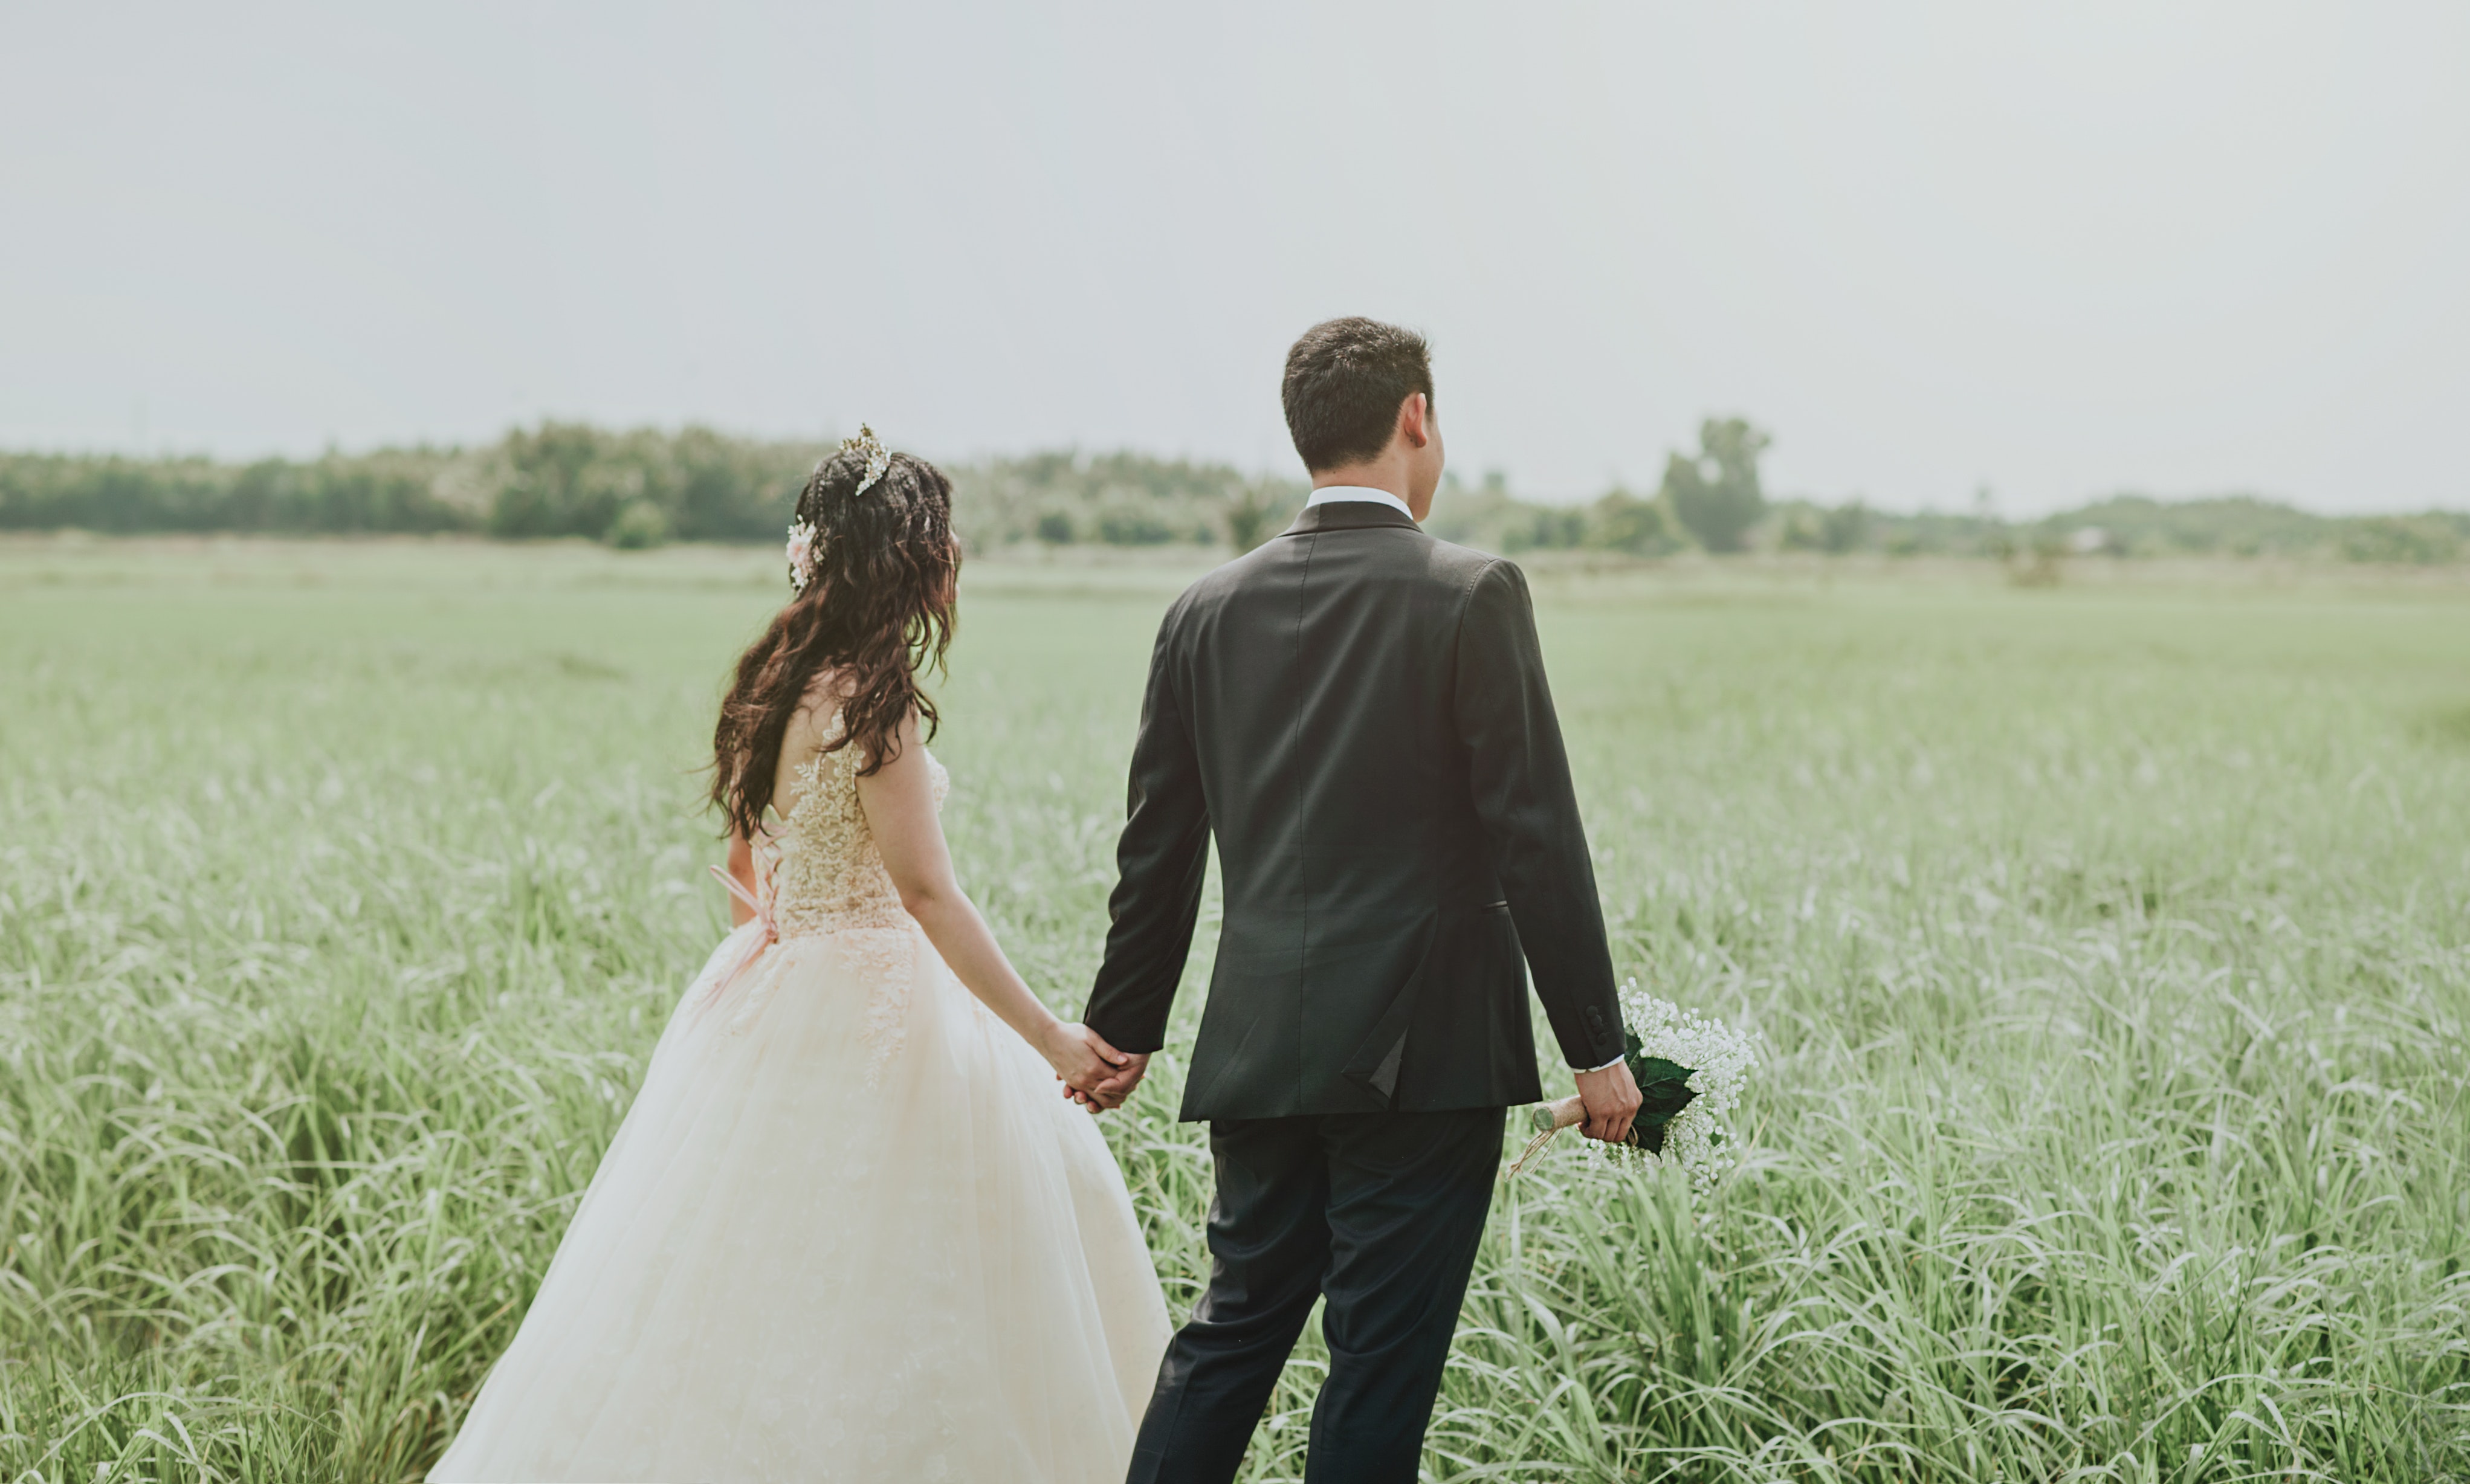 Woman in white wedding dress holding hand to man in black suit photo